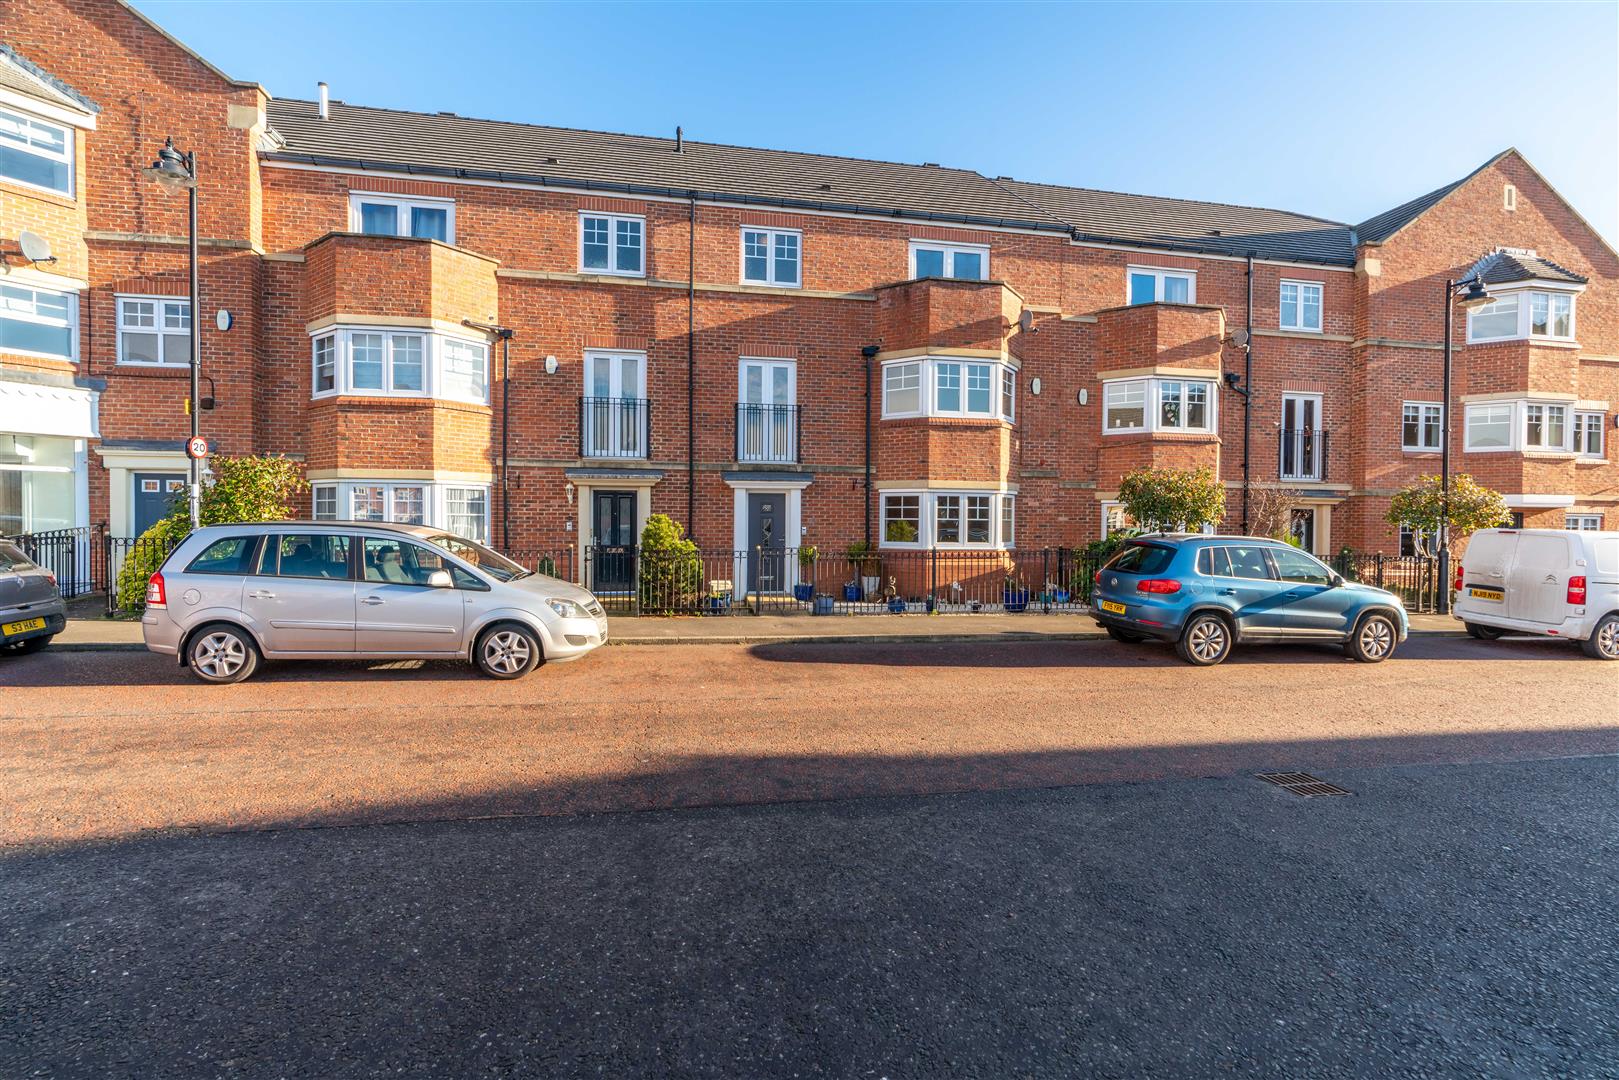 5 bed town house for sale in Featherstone Grove, Great Park, NE3 